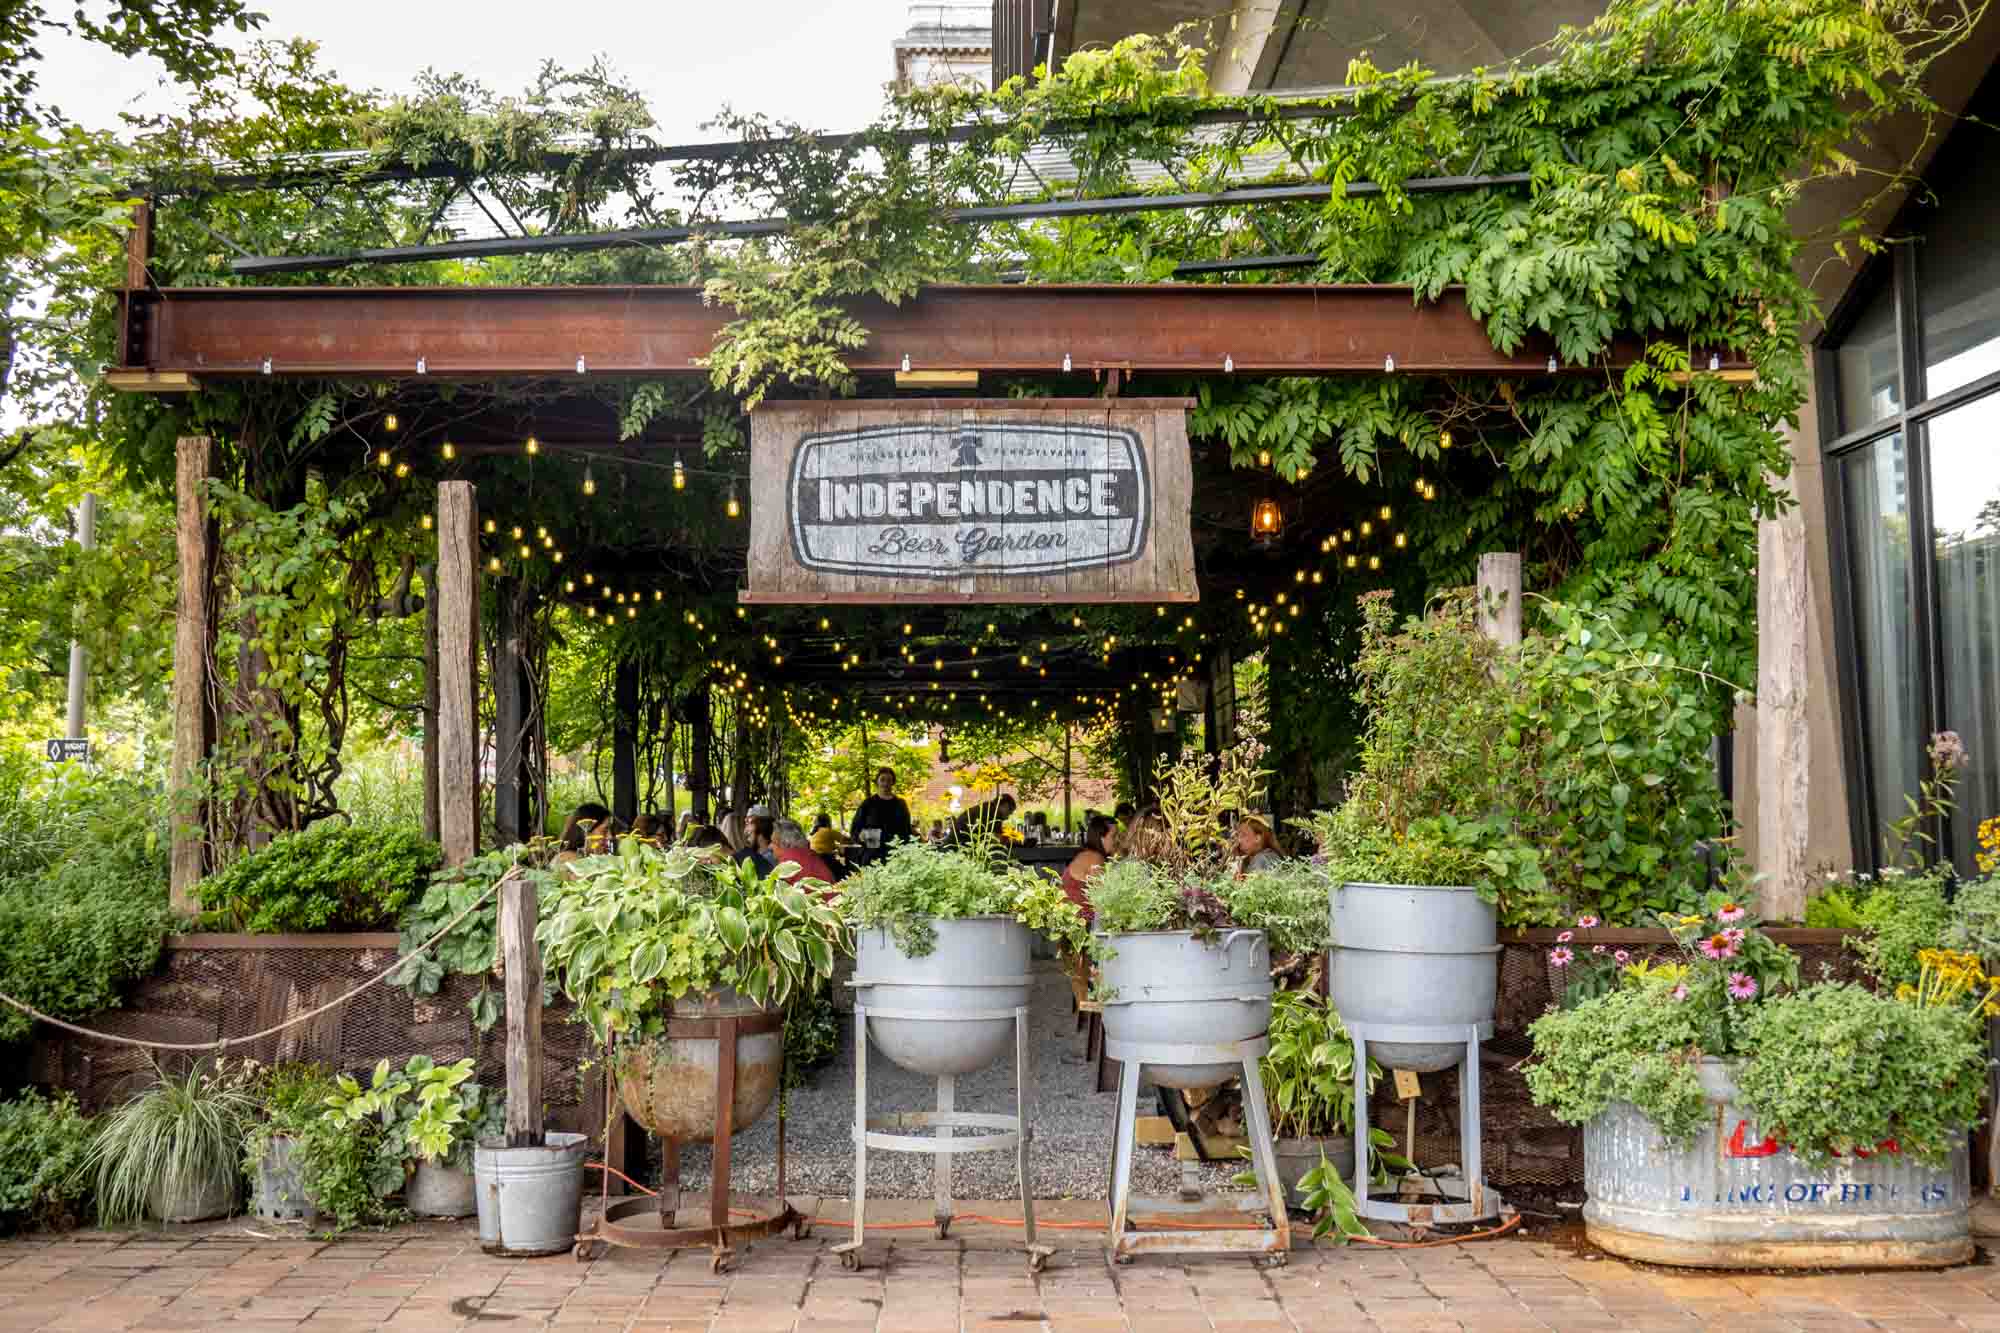 Outdoor seating area filled with plants and a sign: Independence Beer Garden